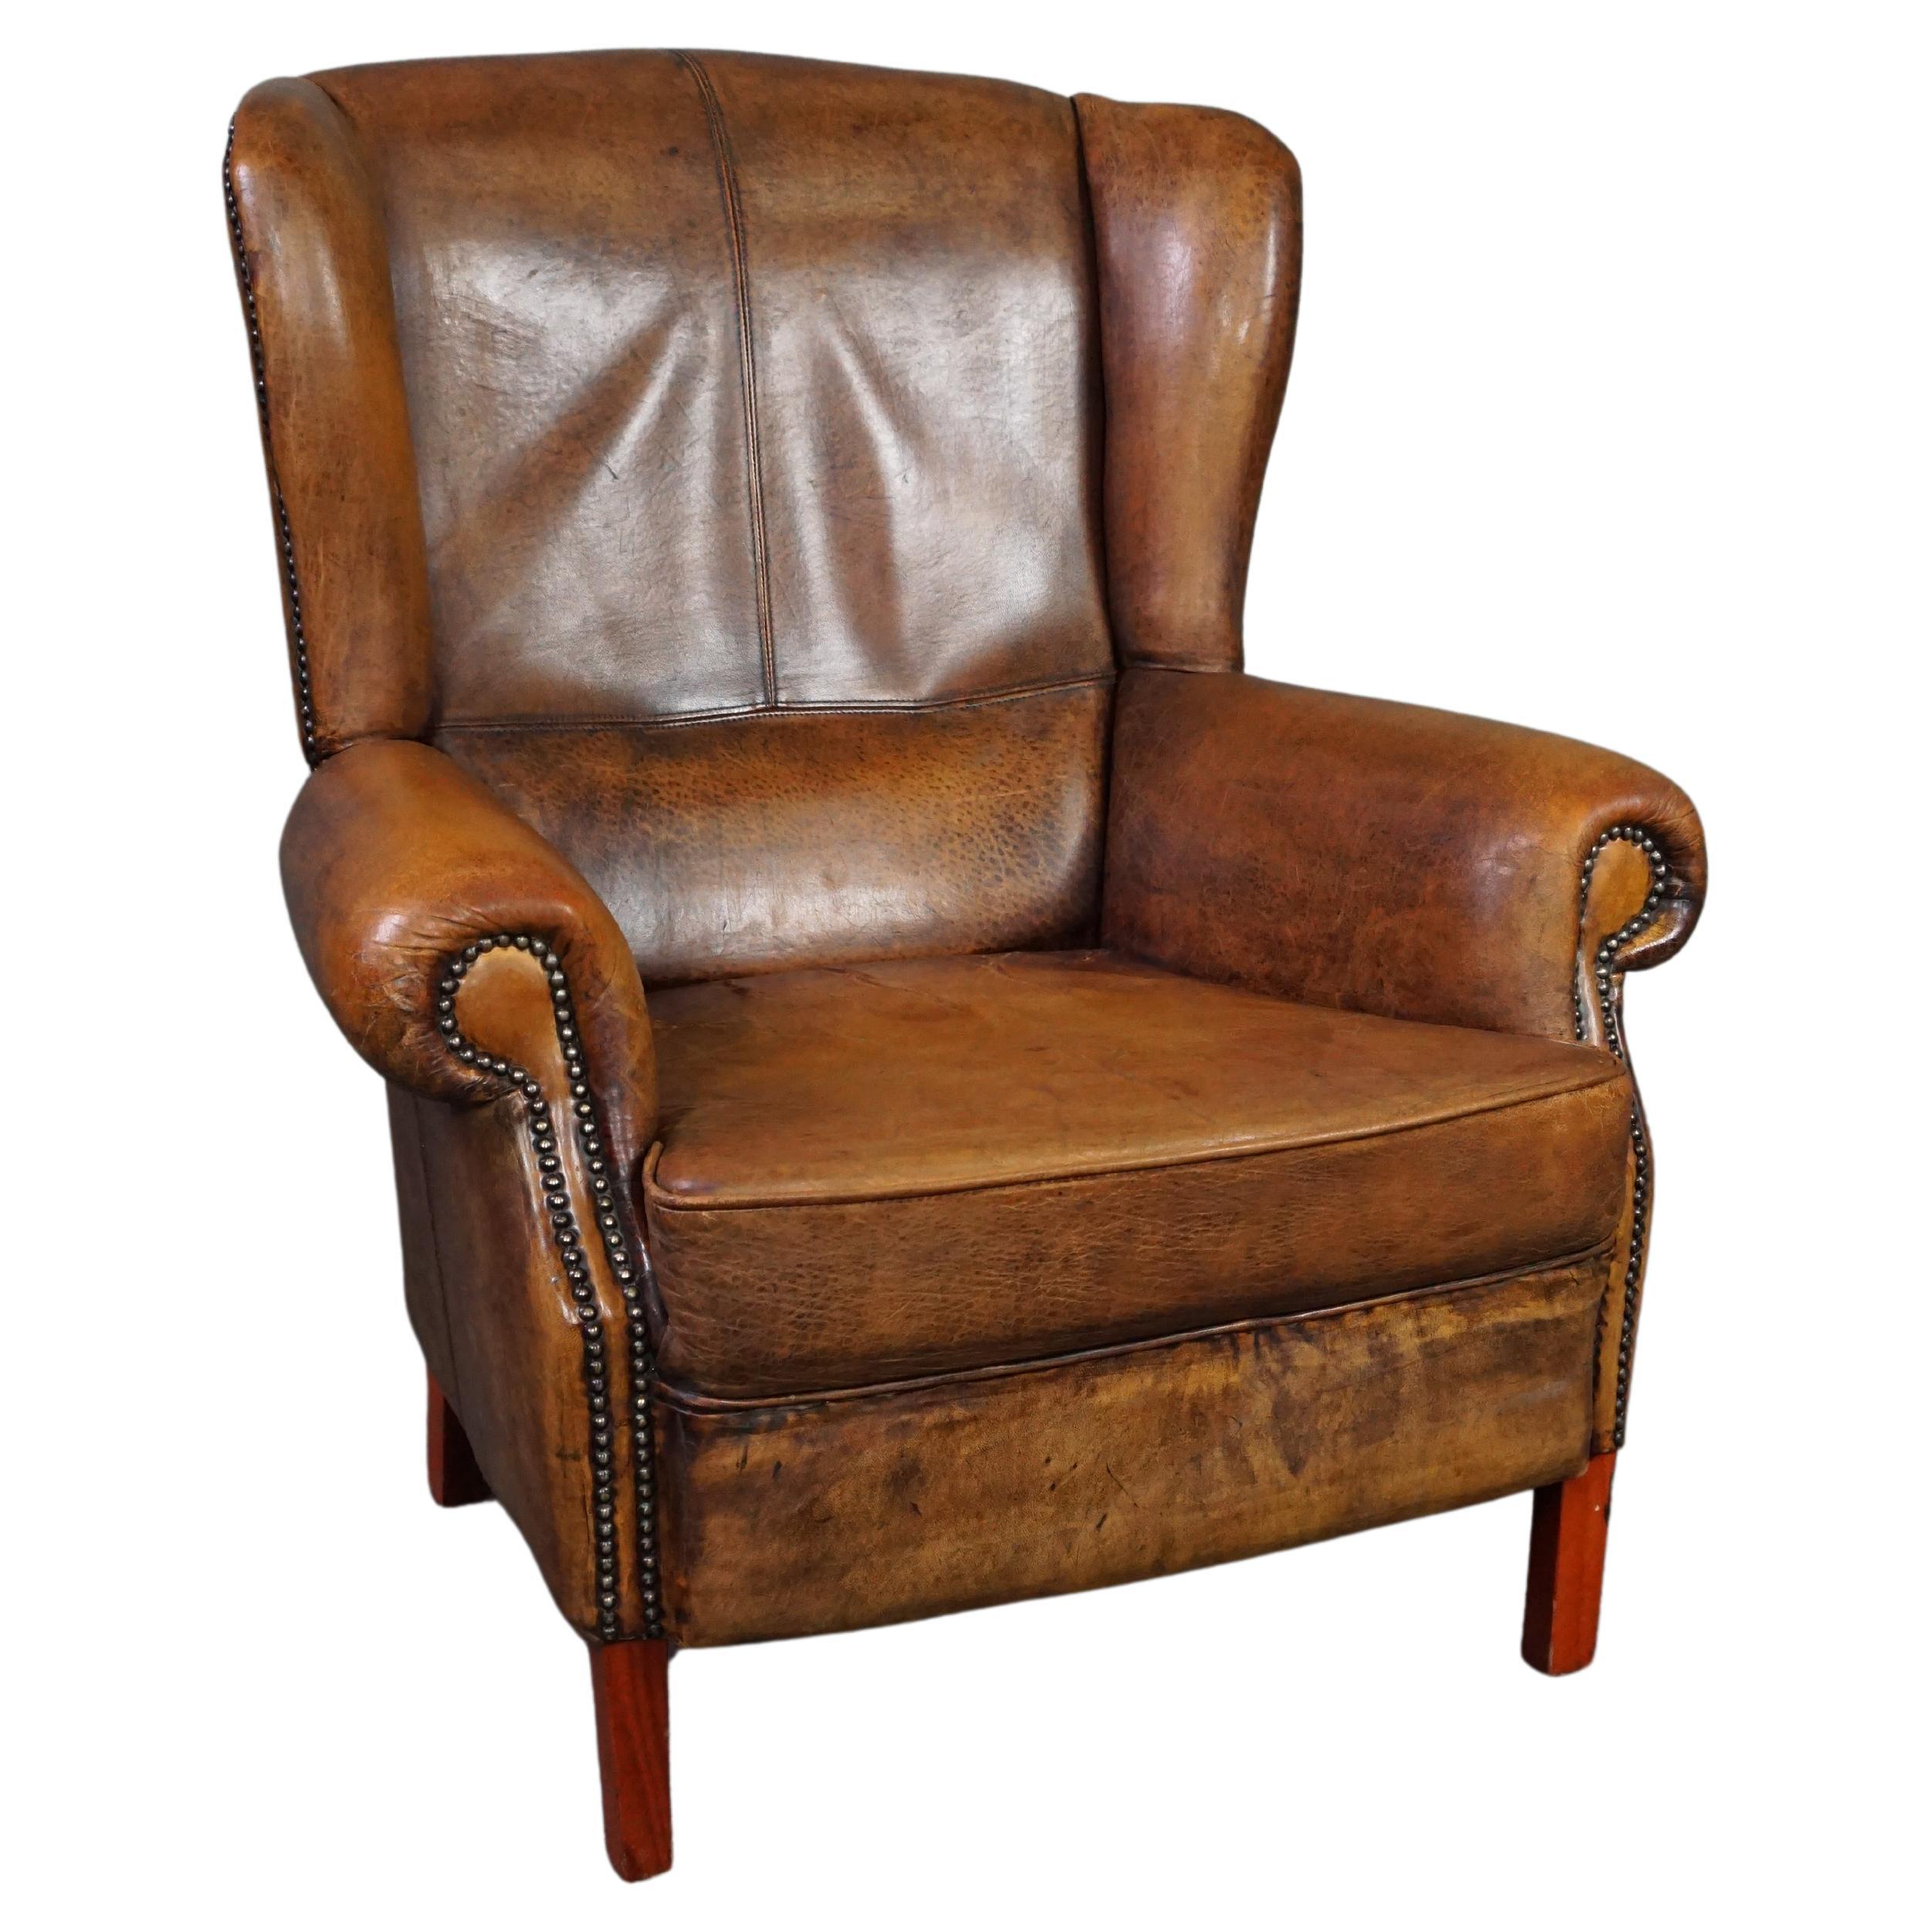 Well-fitting sheepskin leather wing chair